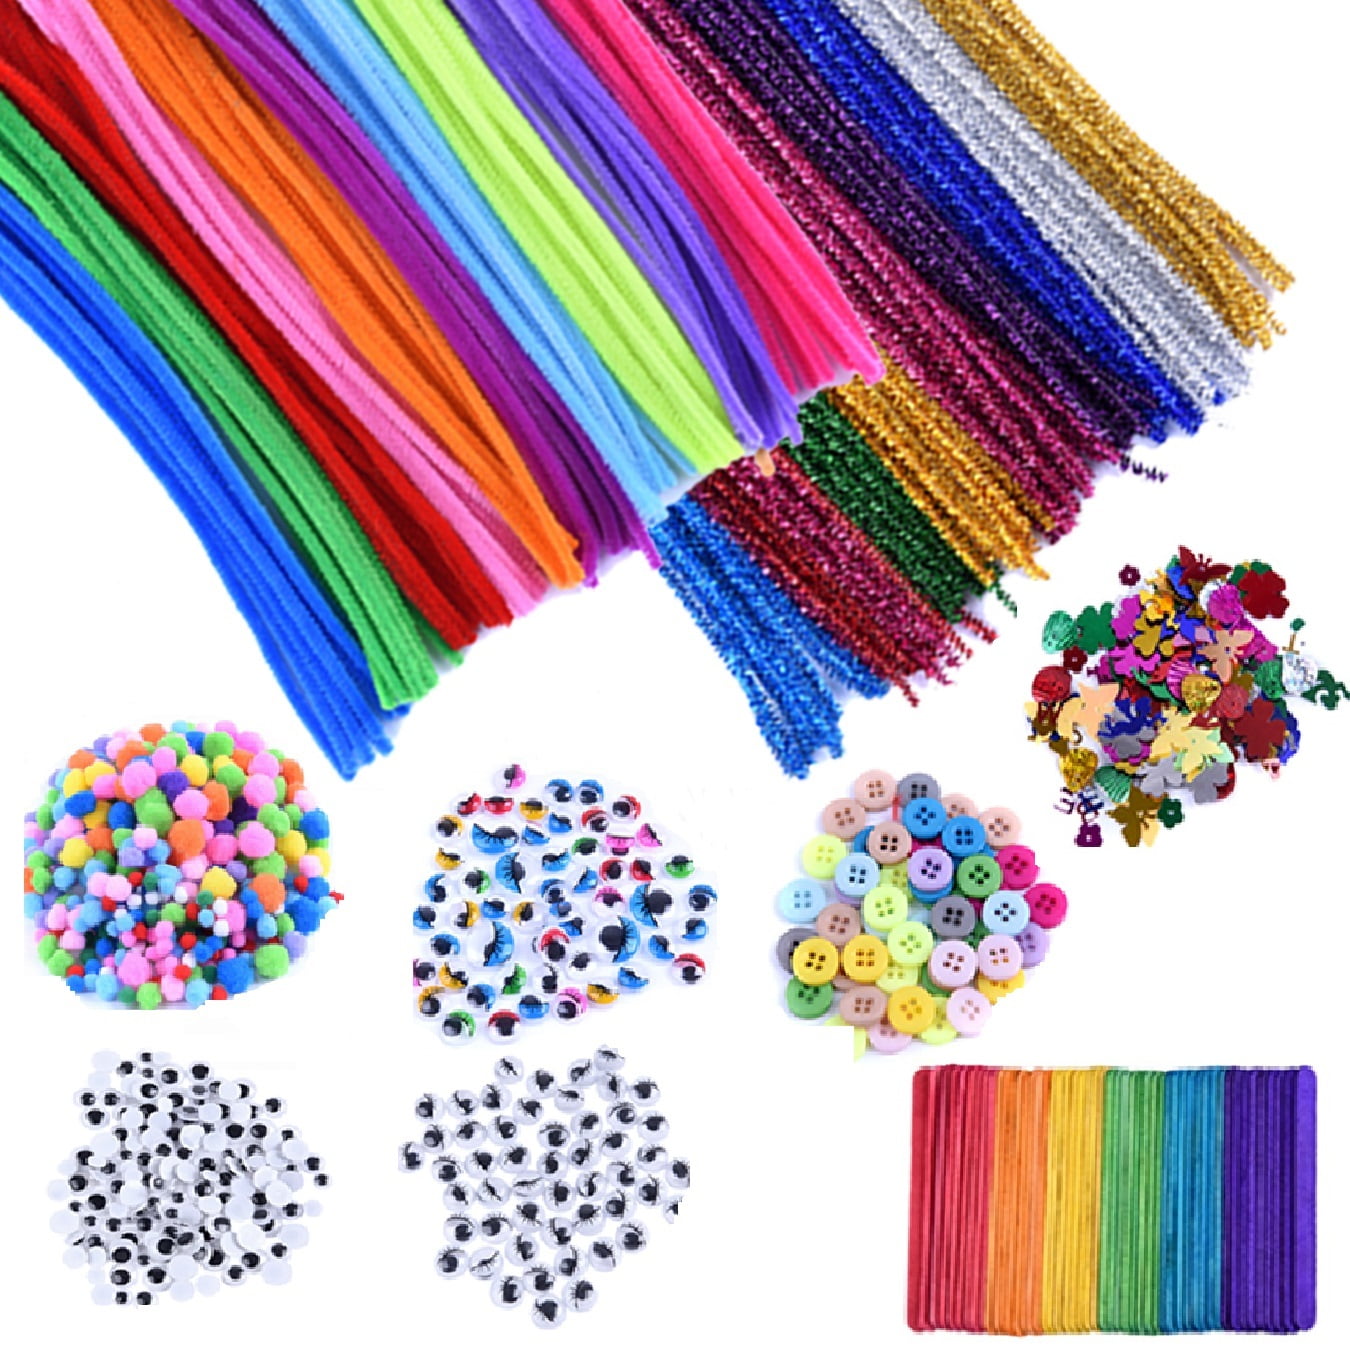 Over 1000 Pieces Caydo Arts and Crafts Supplies for Kids 